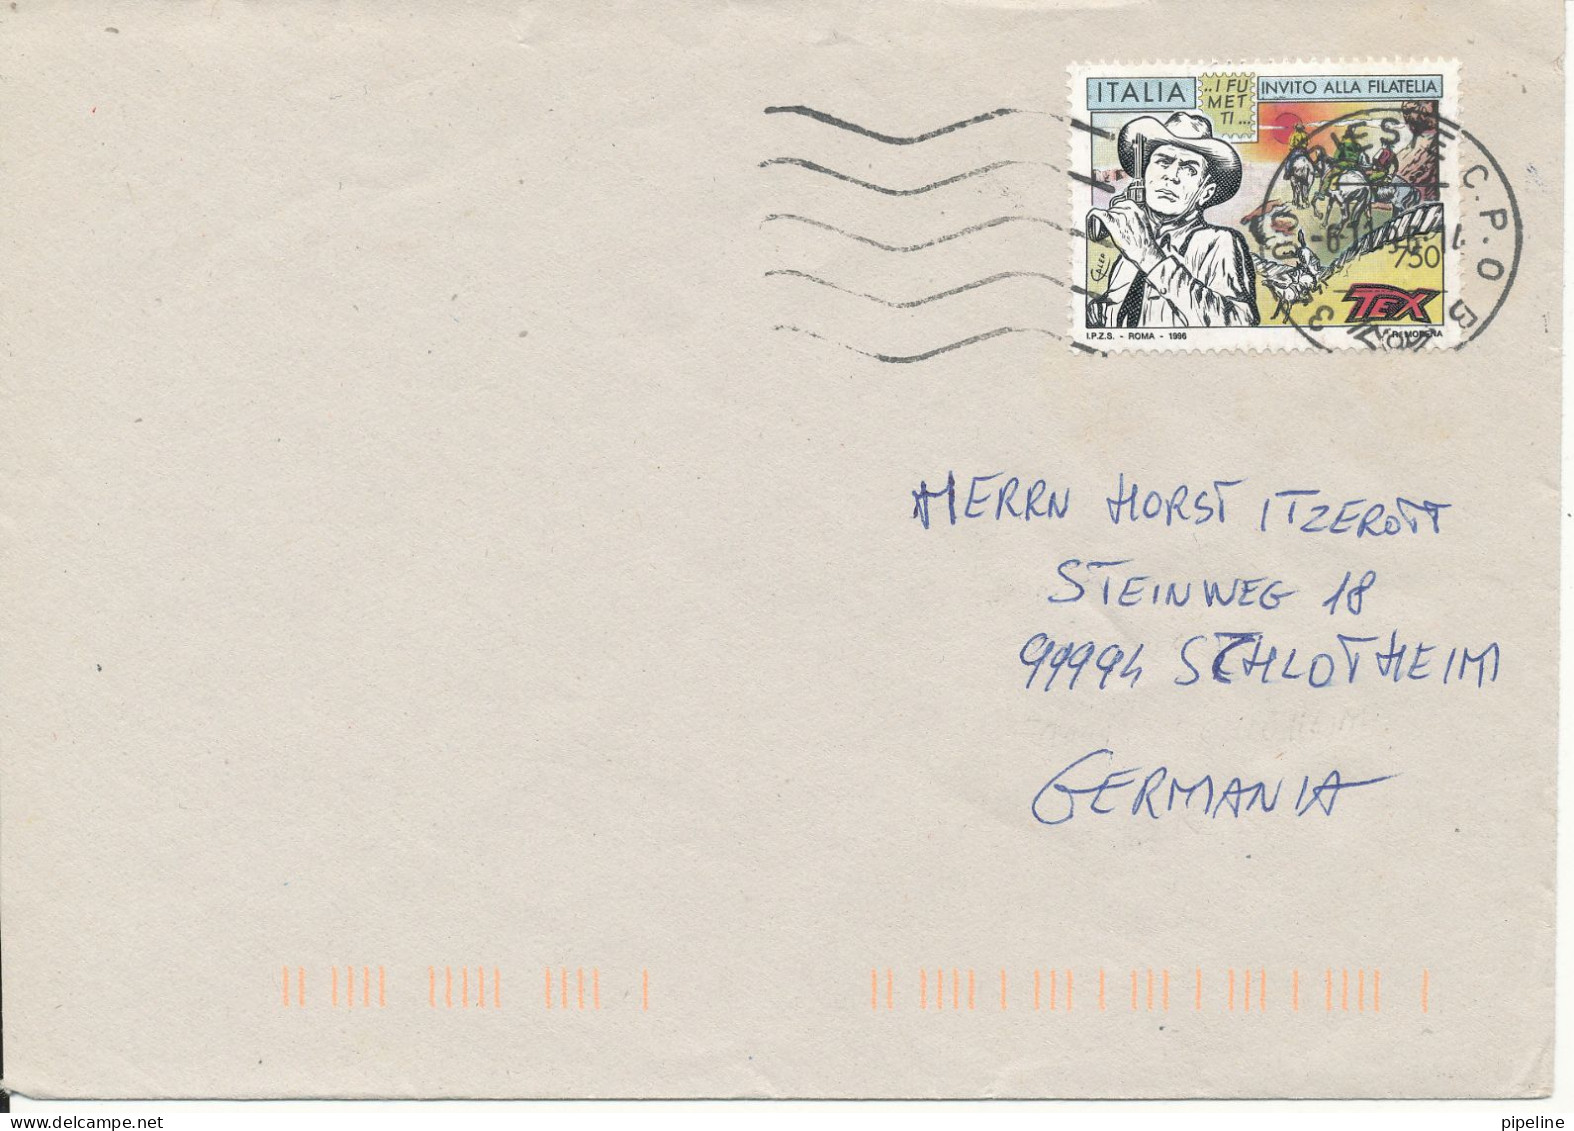 Italy Cover Sent To Germany 6-11-1996 Single Franked - 1991-00: Marcophilia